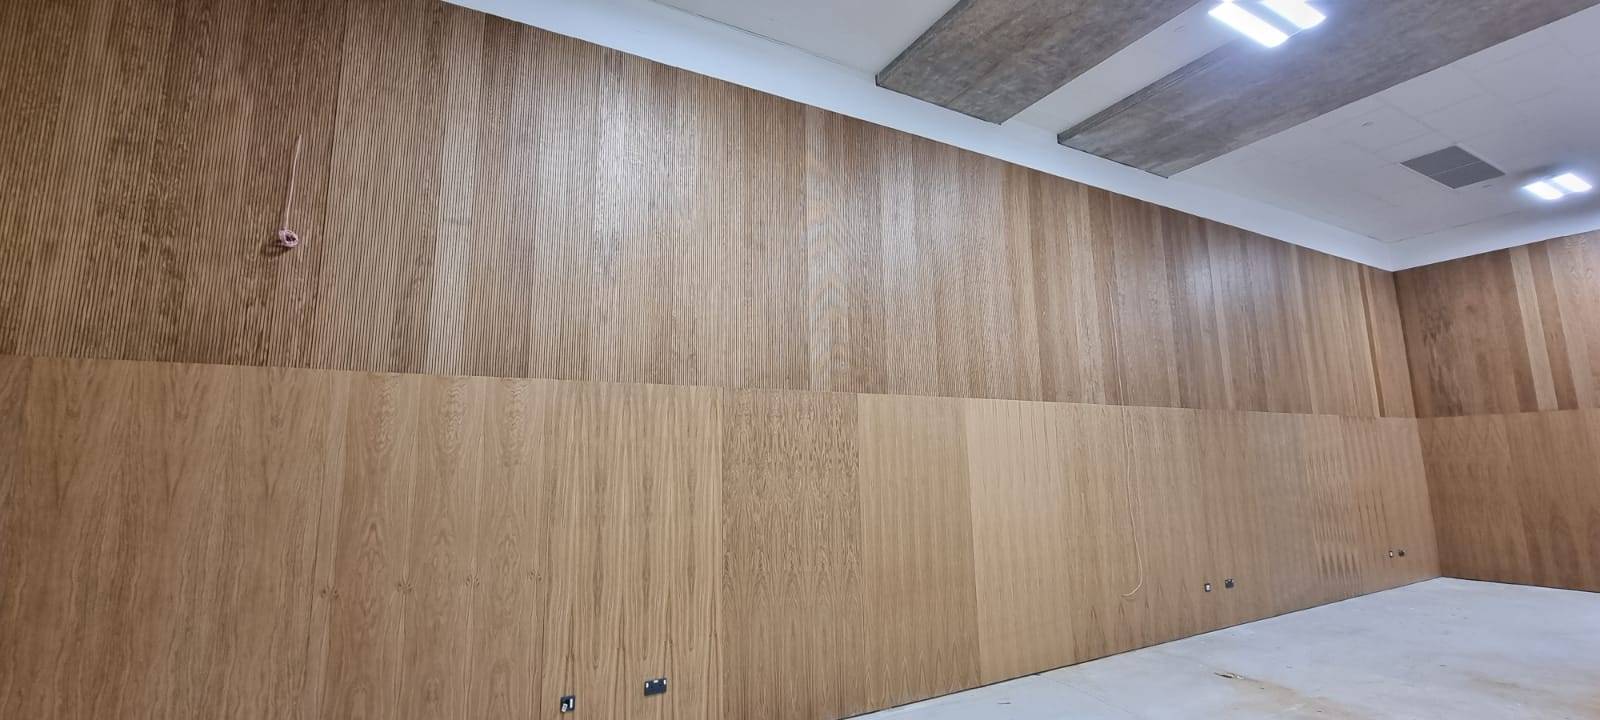 Absorb-R WoodTec Grooved Ceiling - Grooved Acoustic Panel